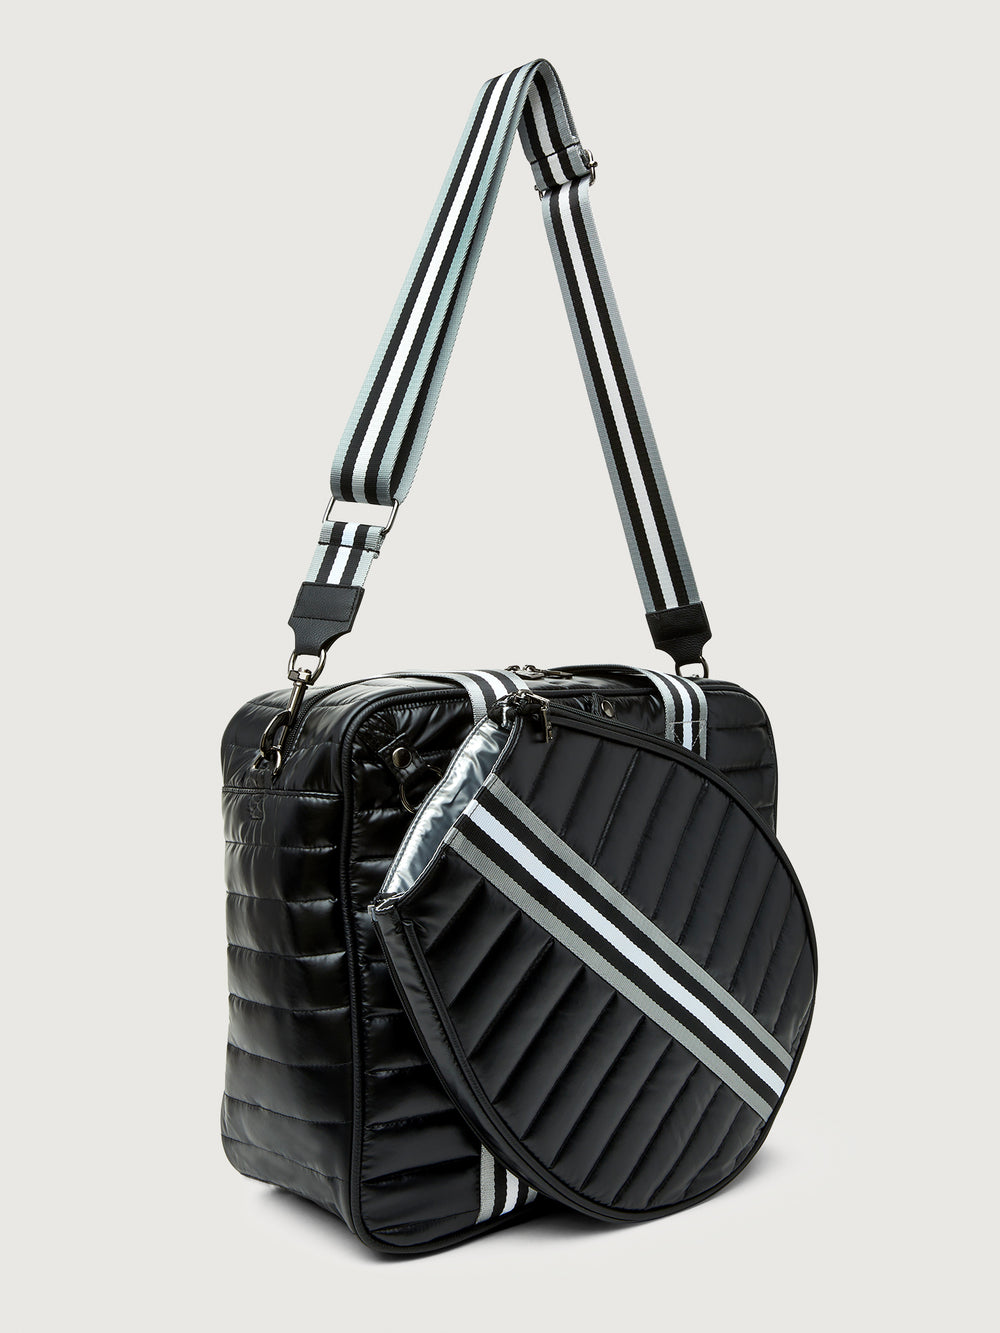 You are the Champion Tennis Bag - Pearl Black/ Pewter/ Black/ White Web